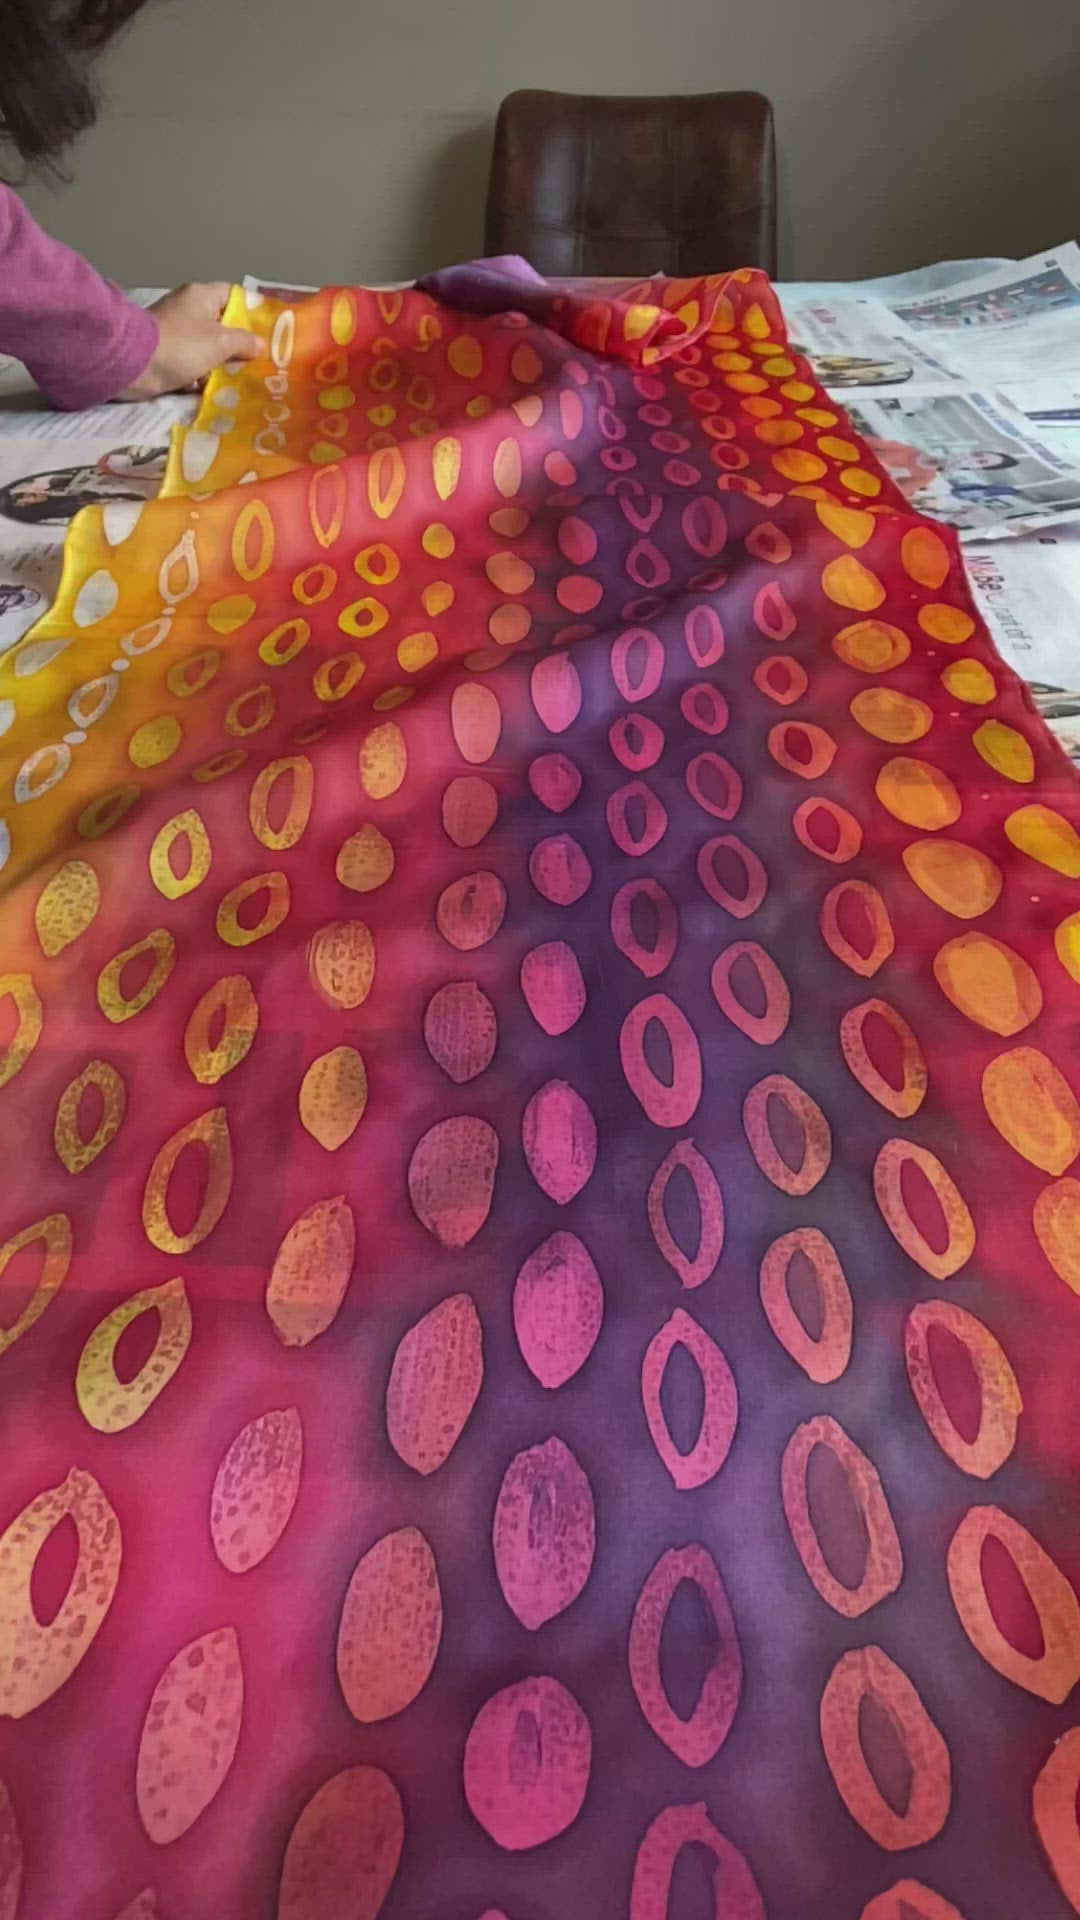 Video of Sunset Runaway Scarf 100% Crepe Satin Silk ~ Silk-painted by hand.